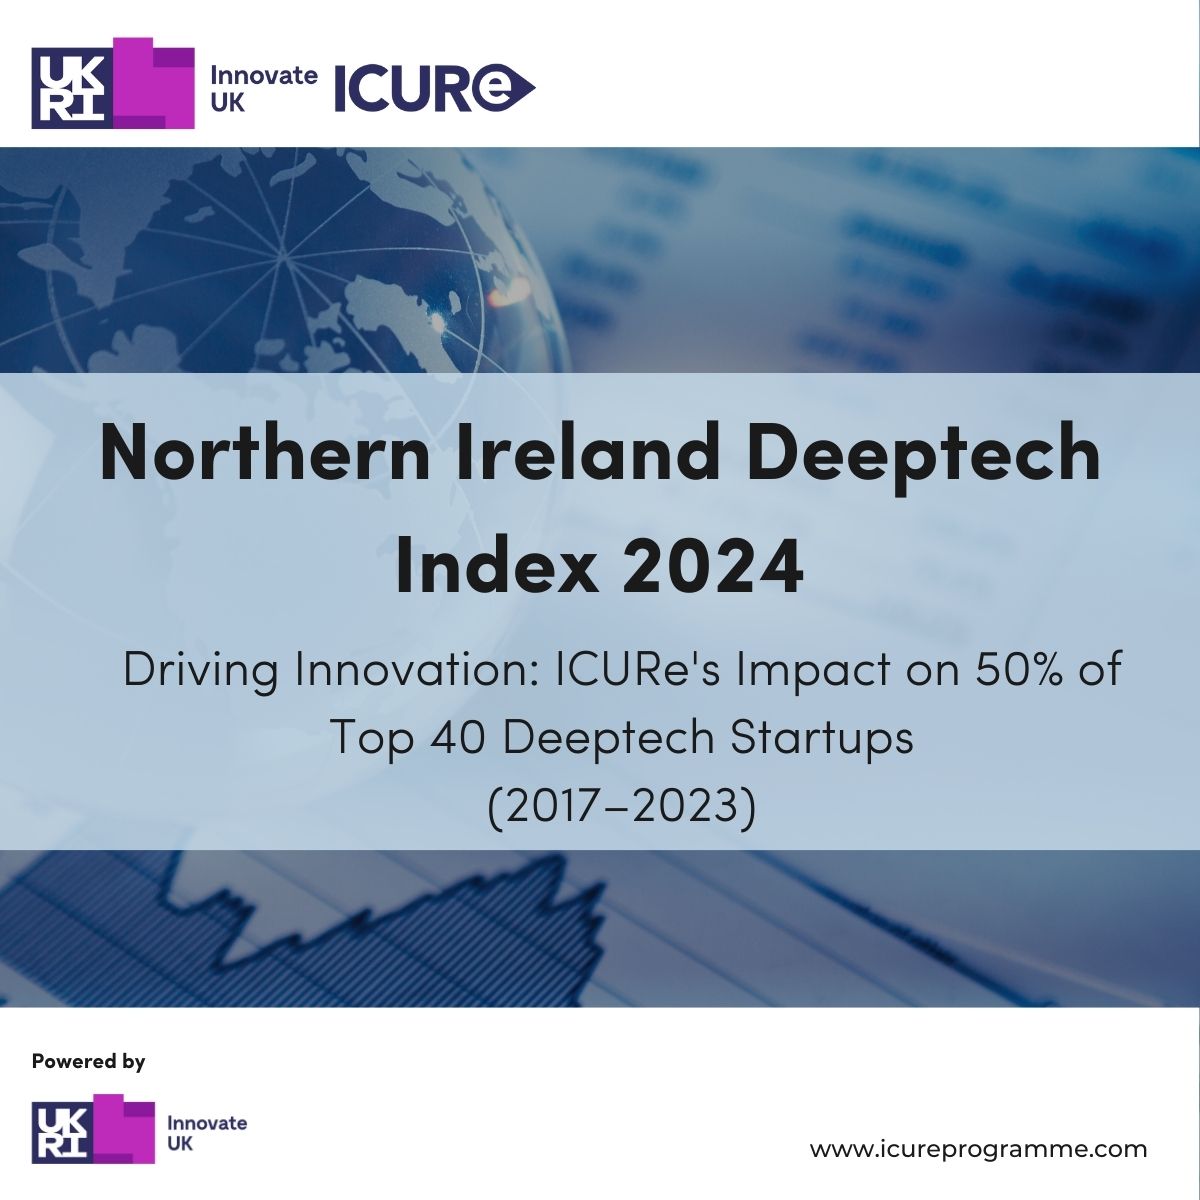 In collaboration with @ICURe, @QubisLtd, and @Beauhurst, we unveil the Northern Ireland Deeptech Index 2024. #ICURe fuels 50% of Top 40 Deeptech Startups (2017–2023). 18 of these spinouts hail from @QUBelfast and 5 from @UlsterUni Read full report below beauhurst.com/research/north…